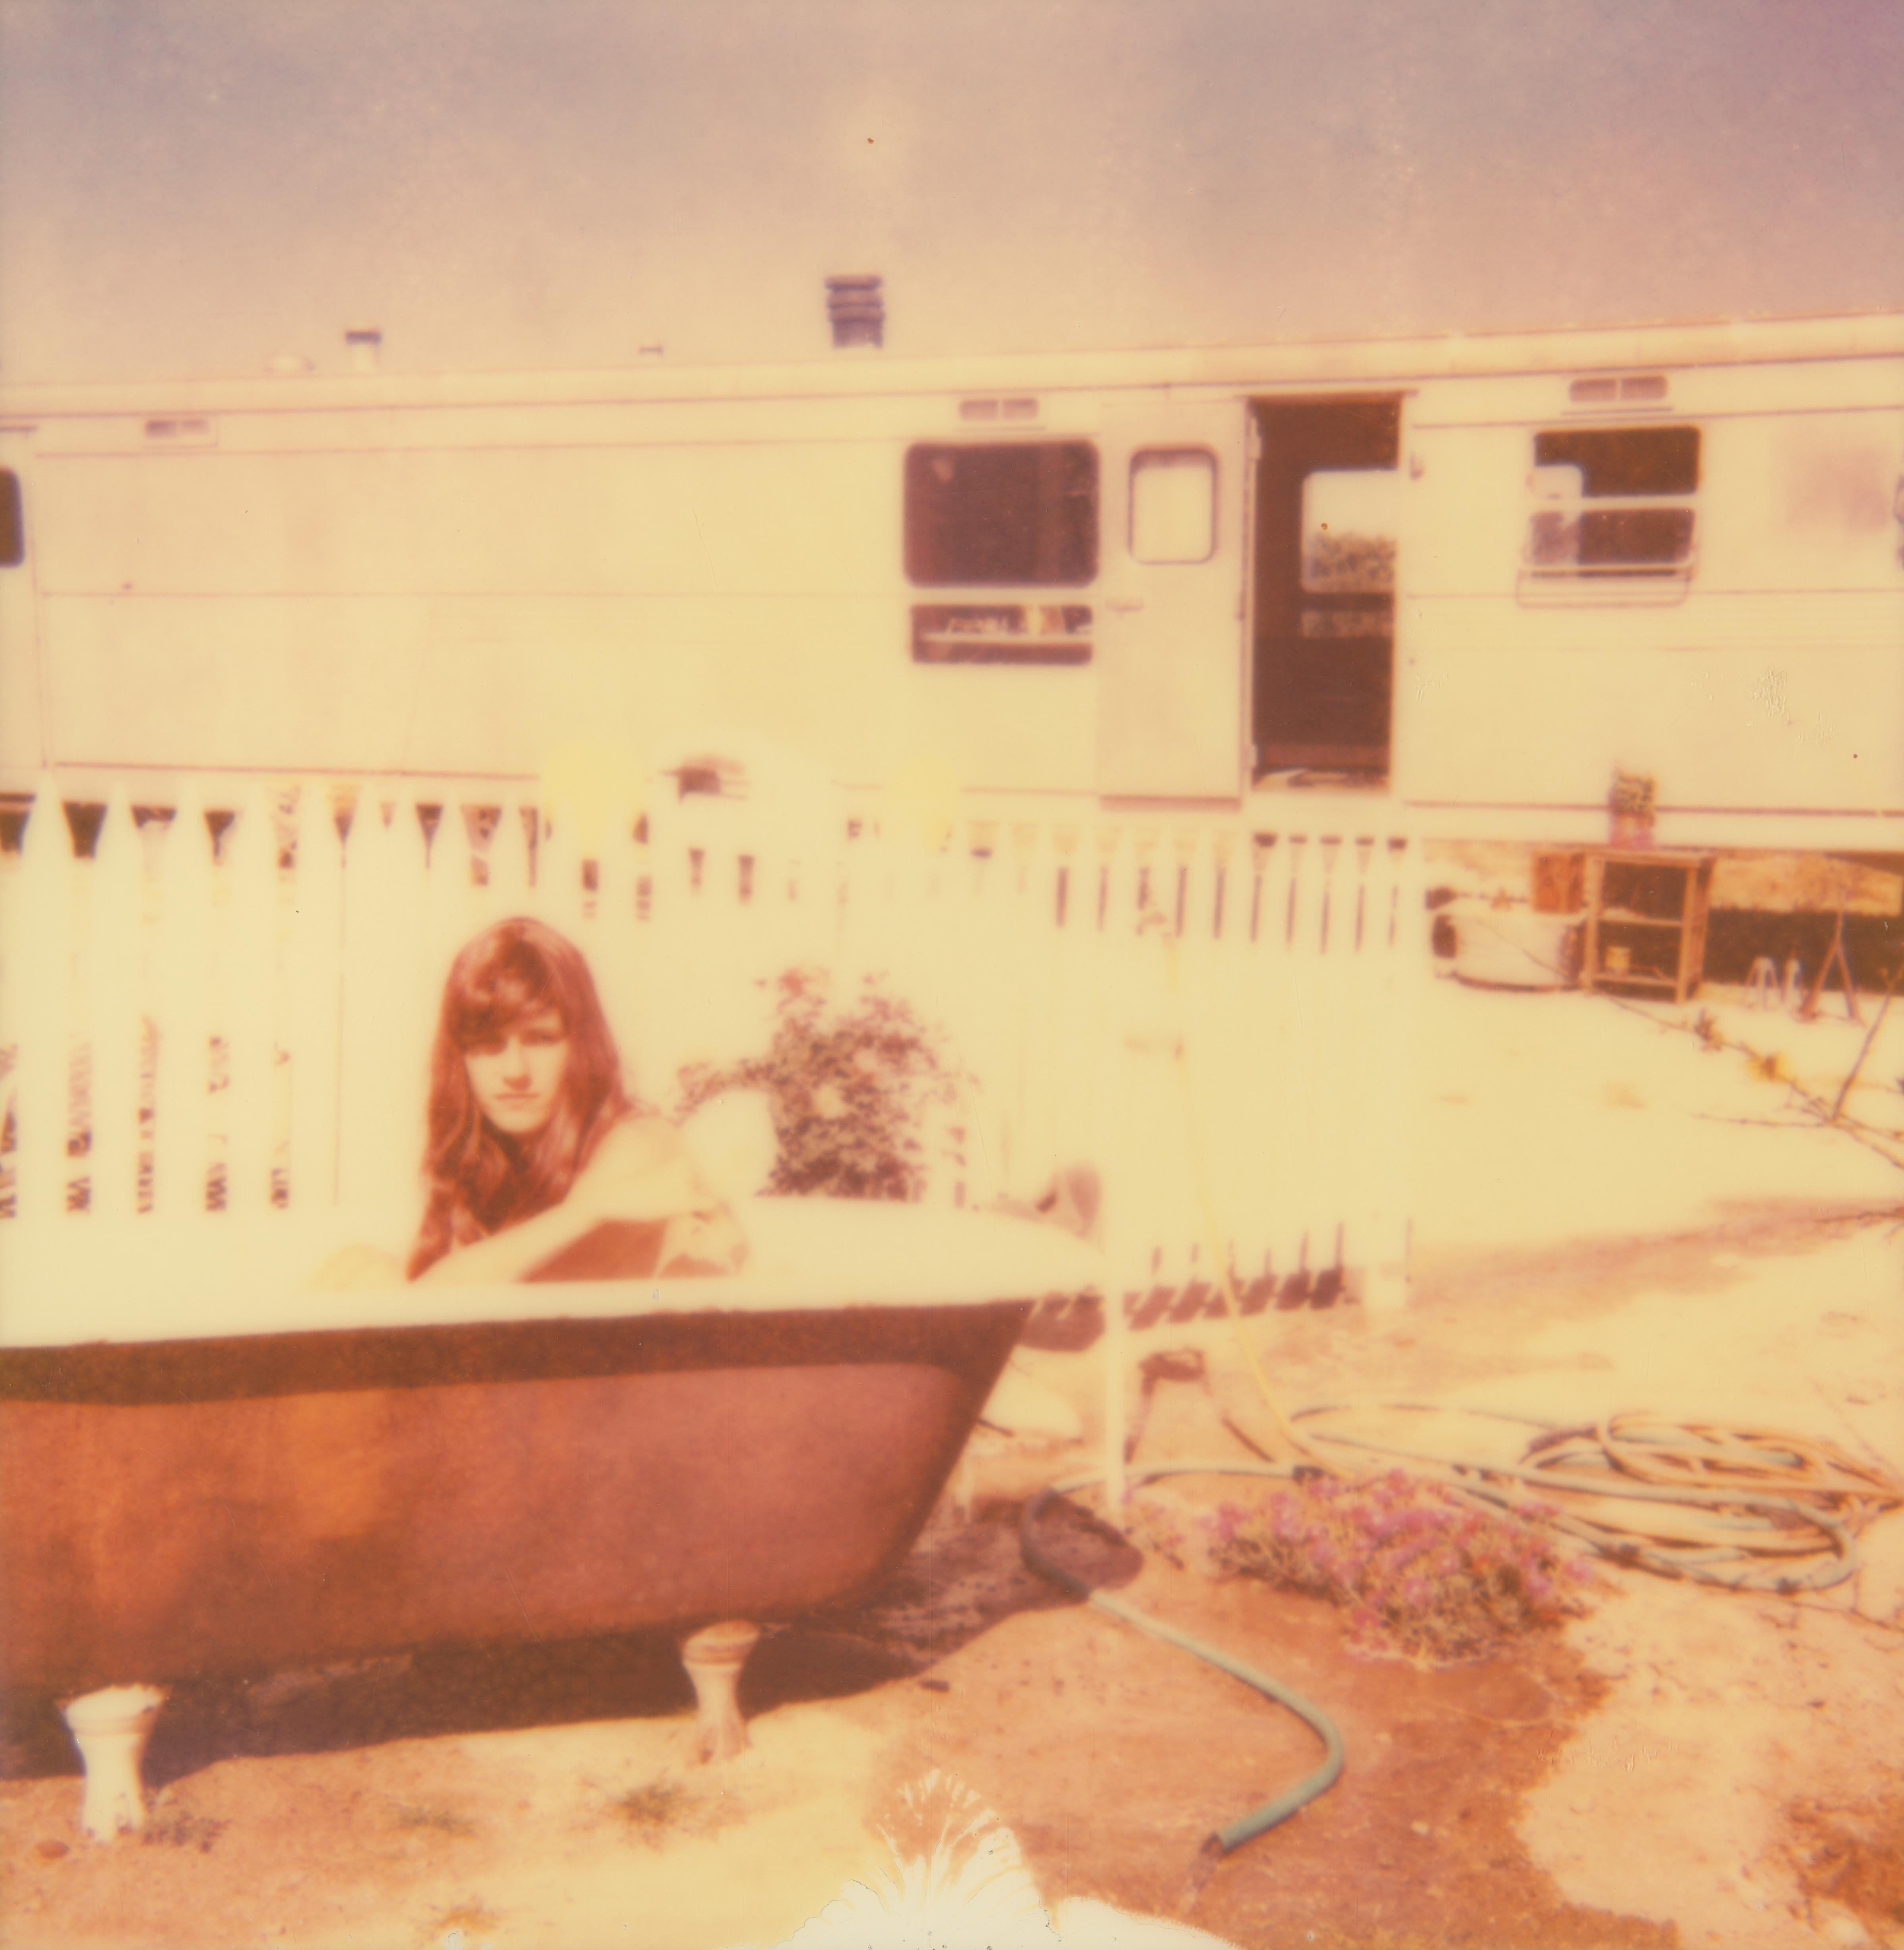 Stefanie Schneider Color Photograph - The Girl III (The Girl behind the White Picket Fence) - Contemporary, Polaroid